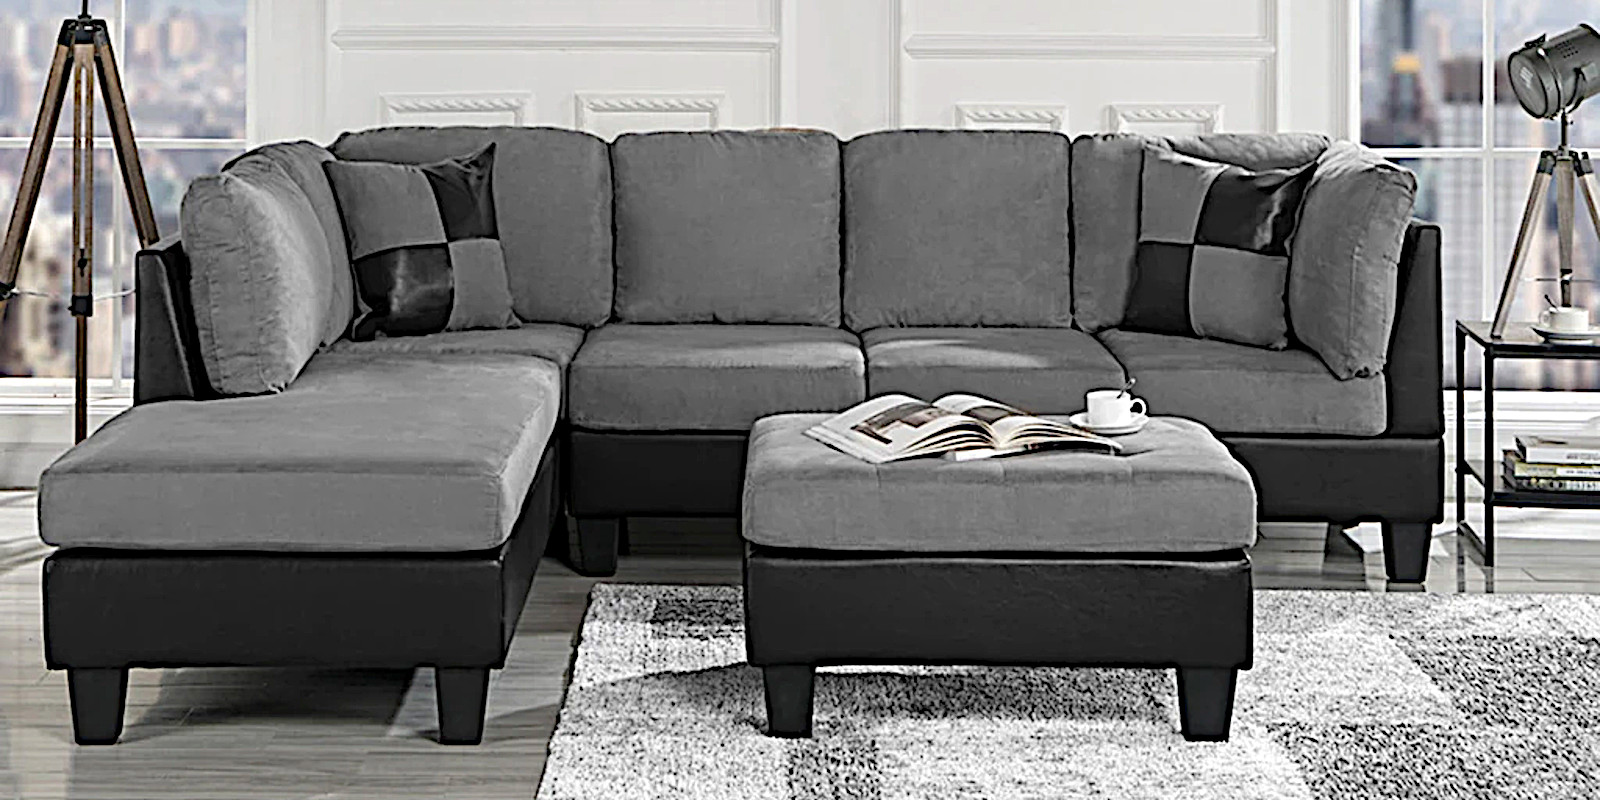 Cost-effective sectionals